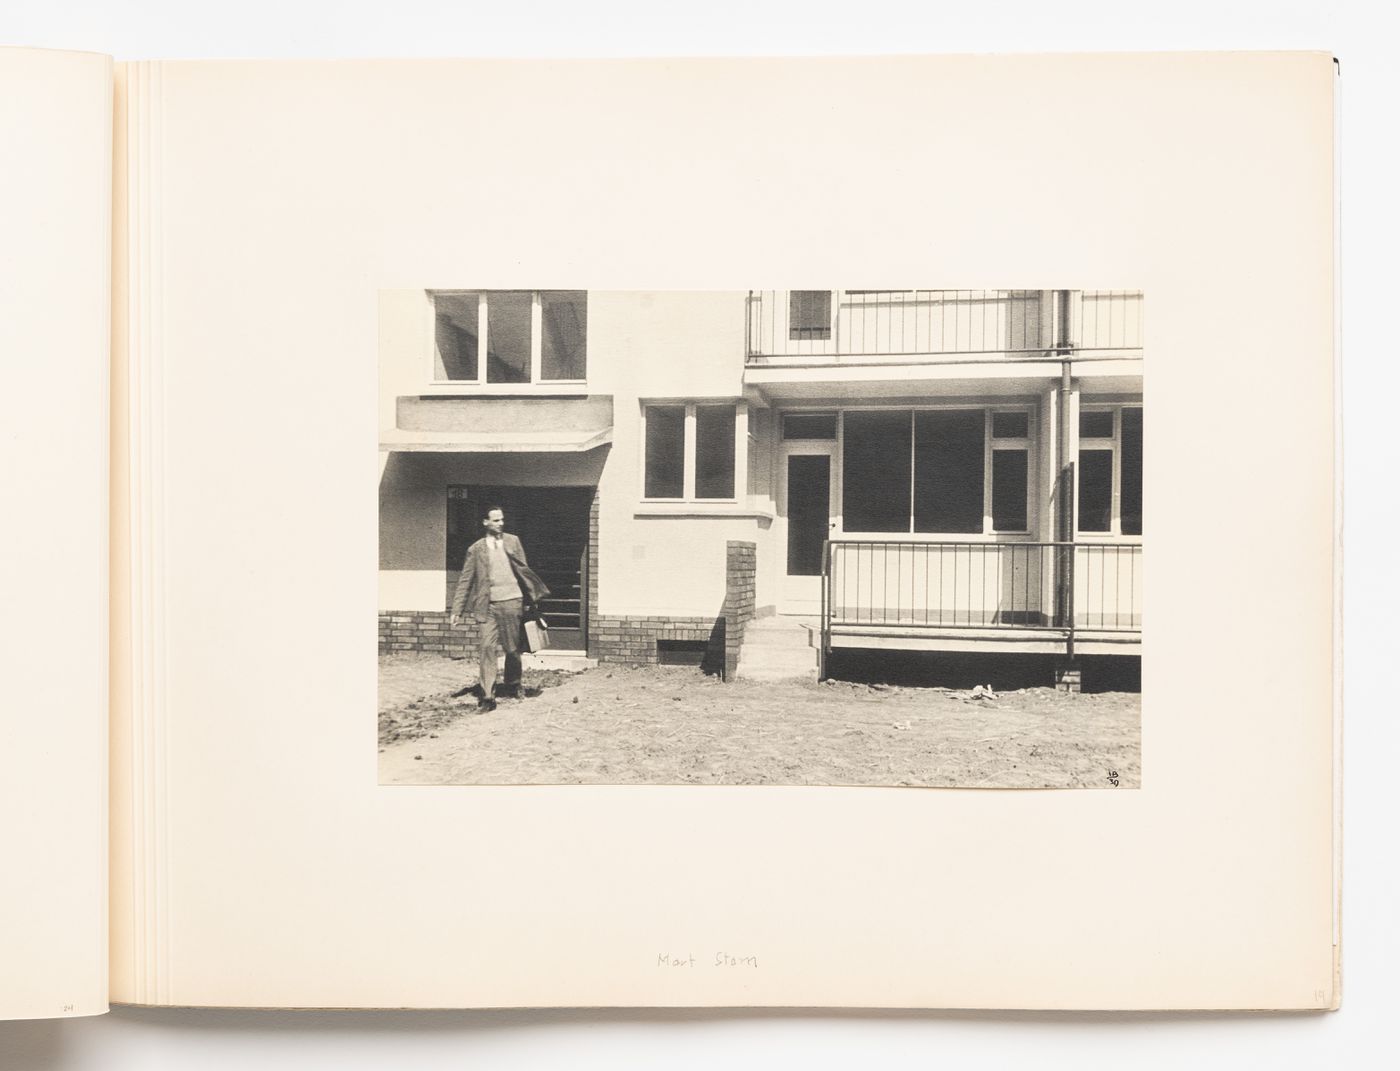 Exterior view of type A housing units with Mart Stam exiting the building, Hellerhof Housing Estate, Frankfurt am Main, Germany